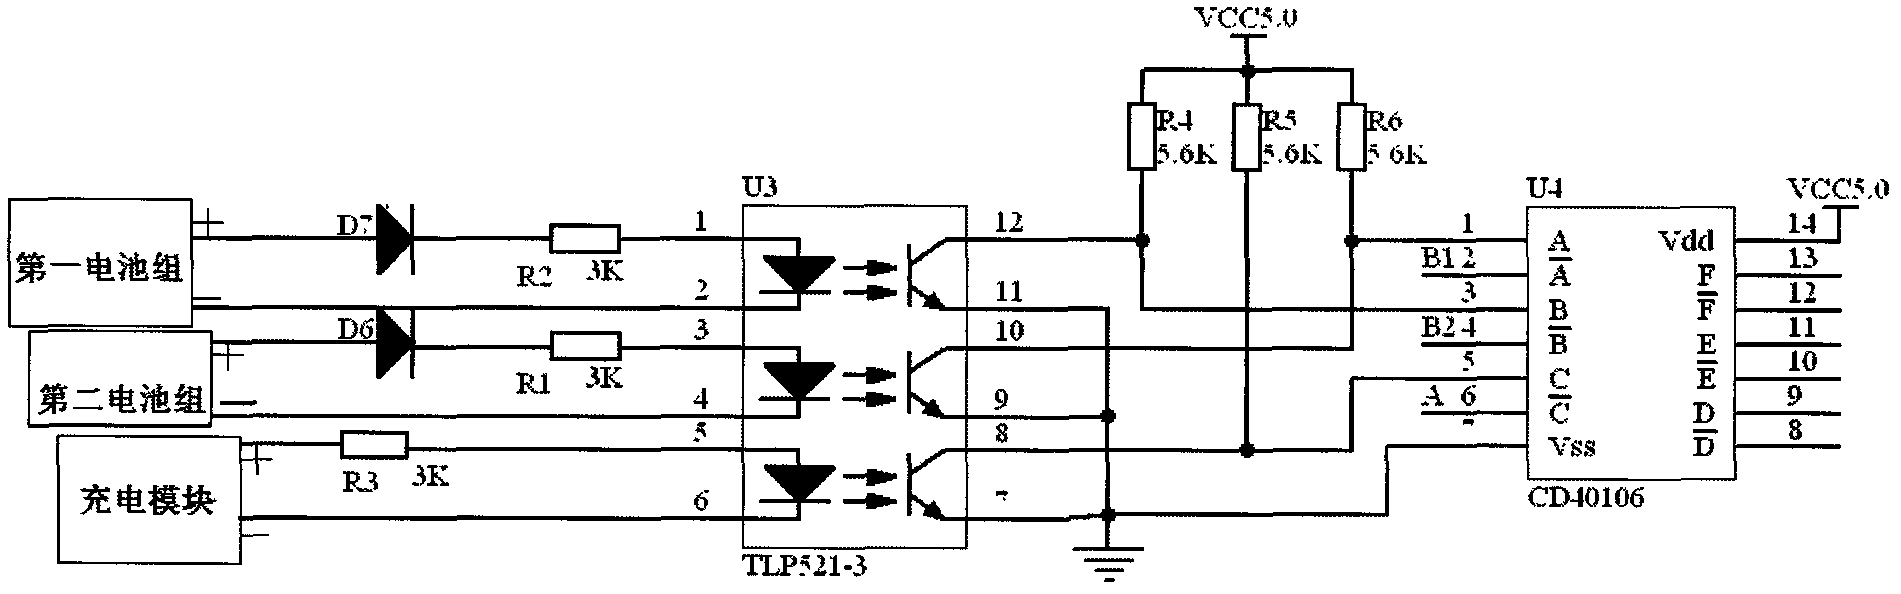 Alternating current-direct current two-level isolated direct current power device